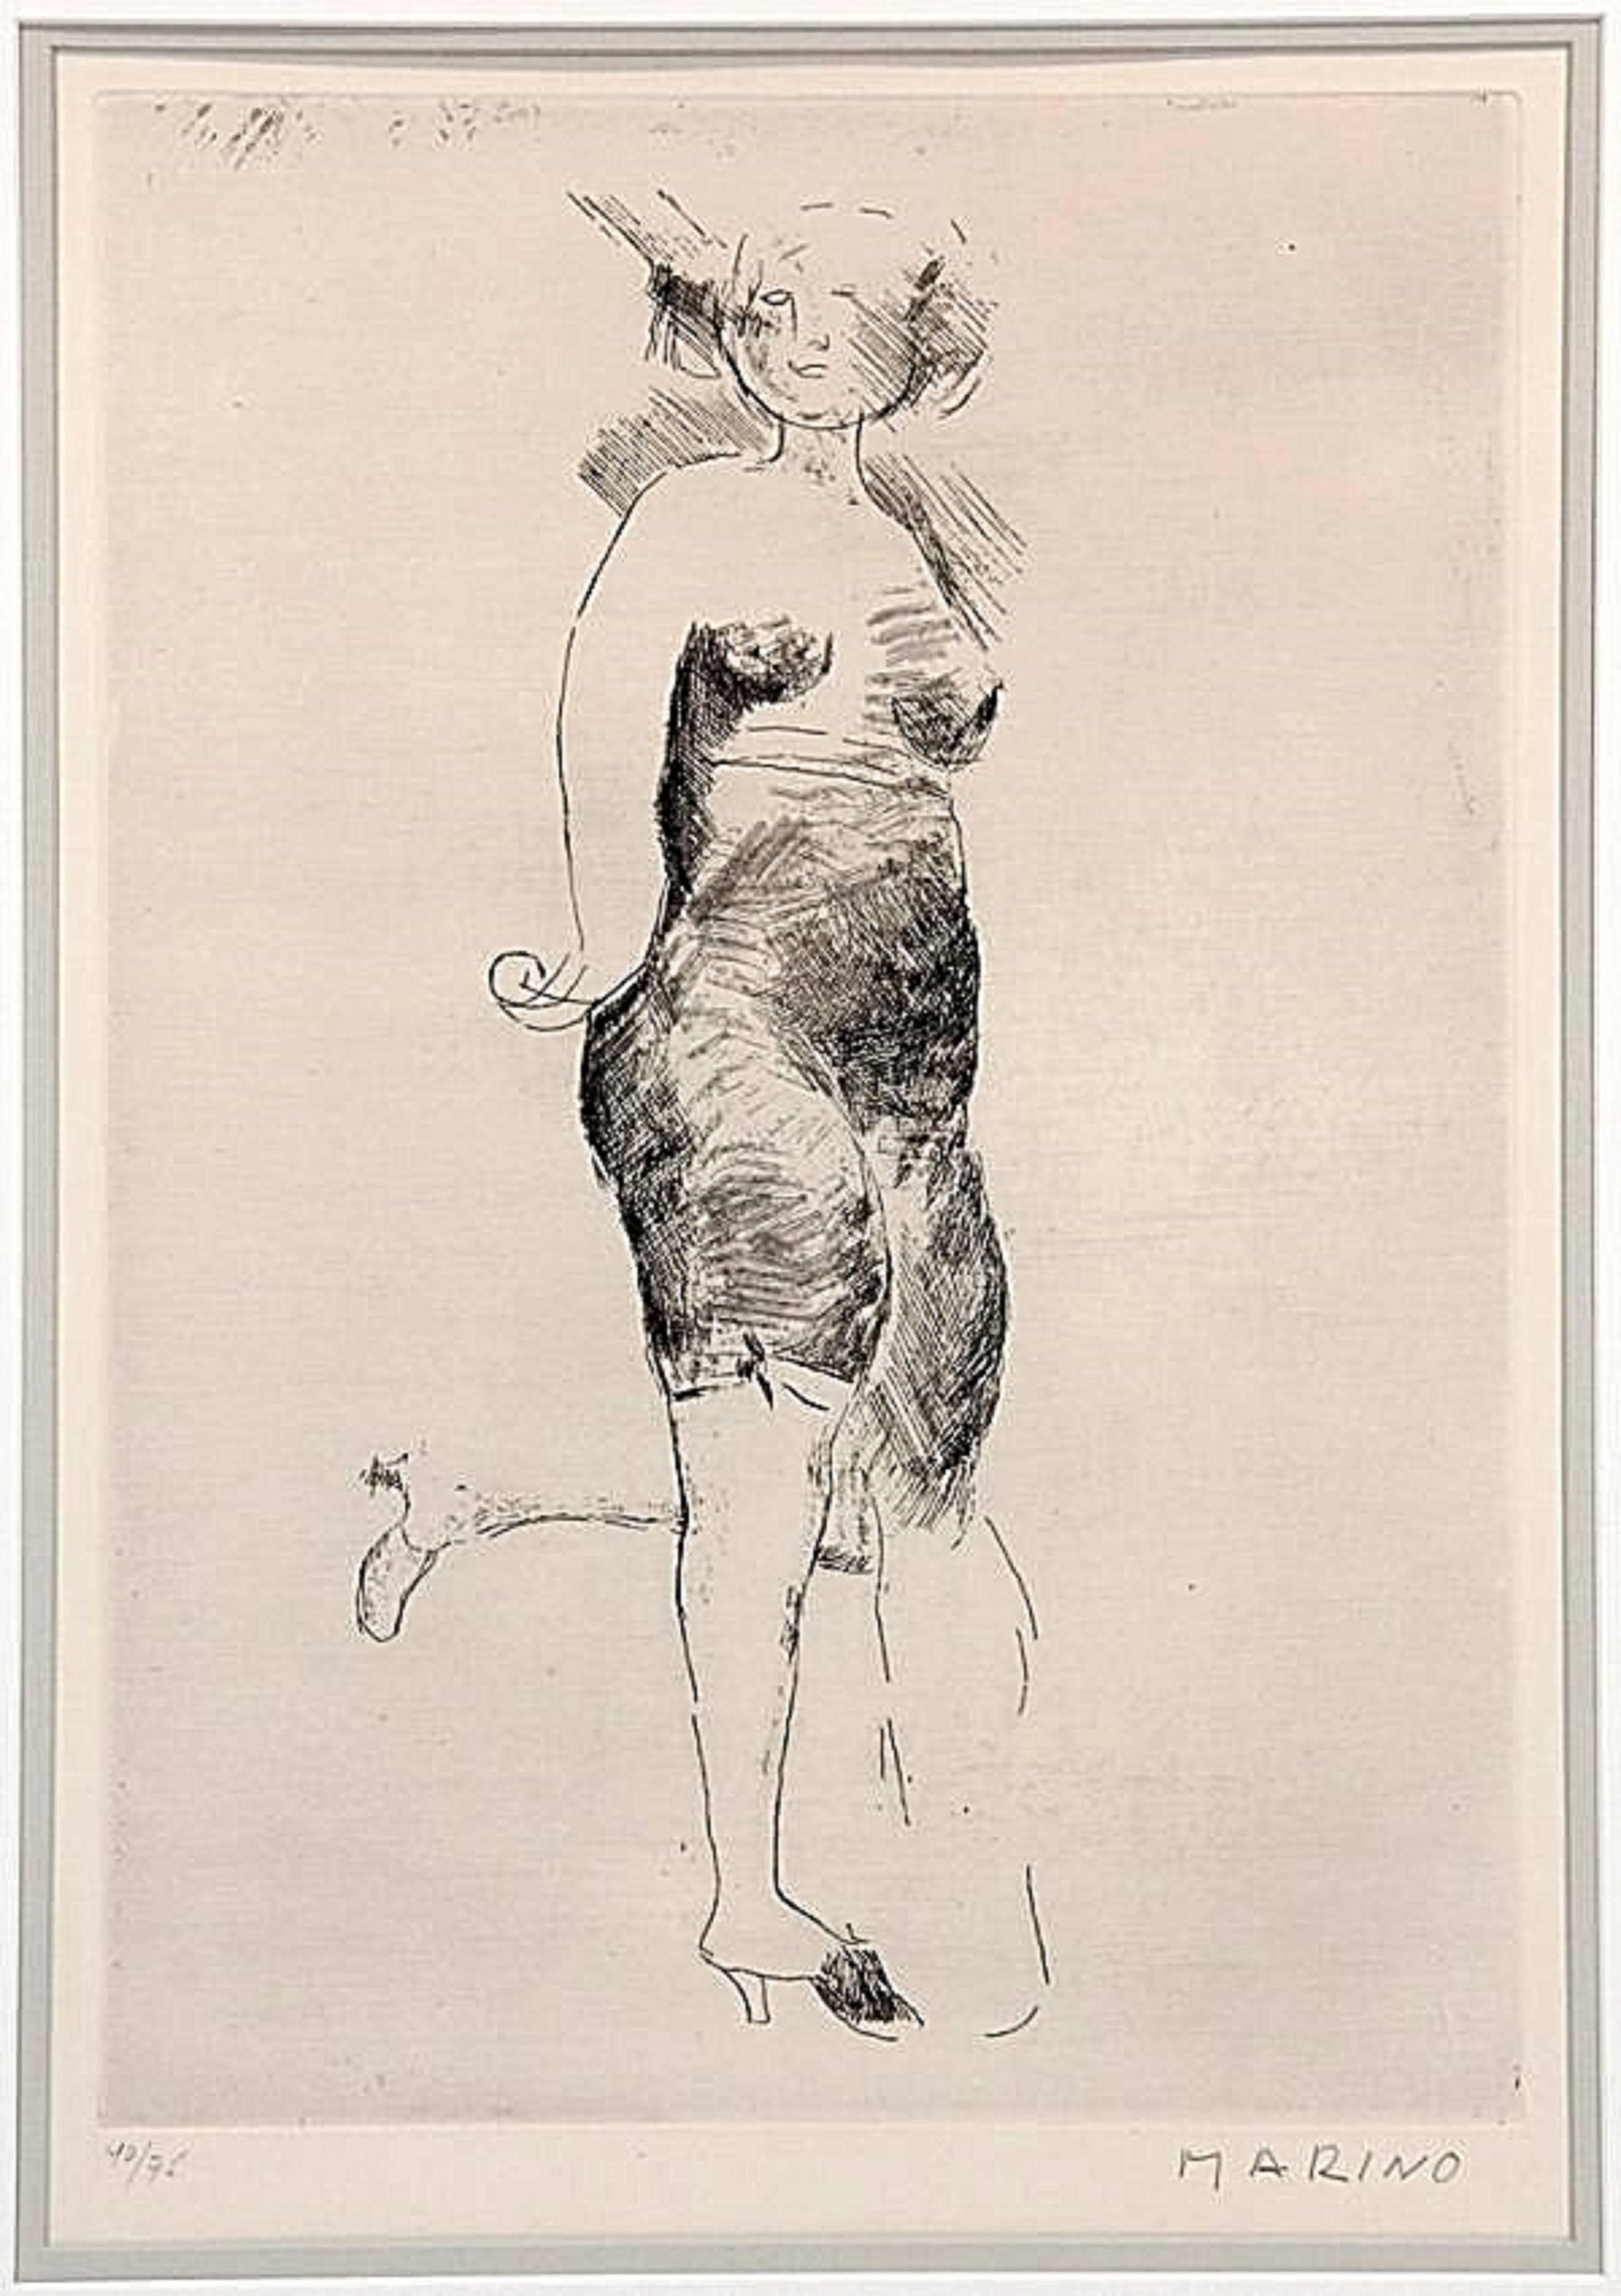 Marino Marini Etching "Miracle" Hand Signed and Numbered